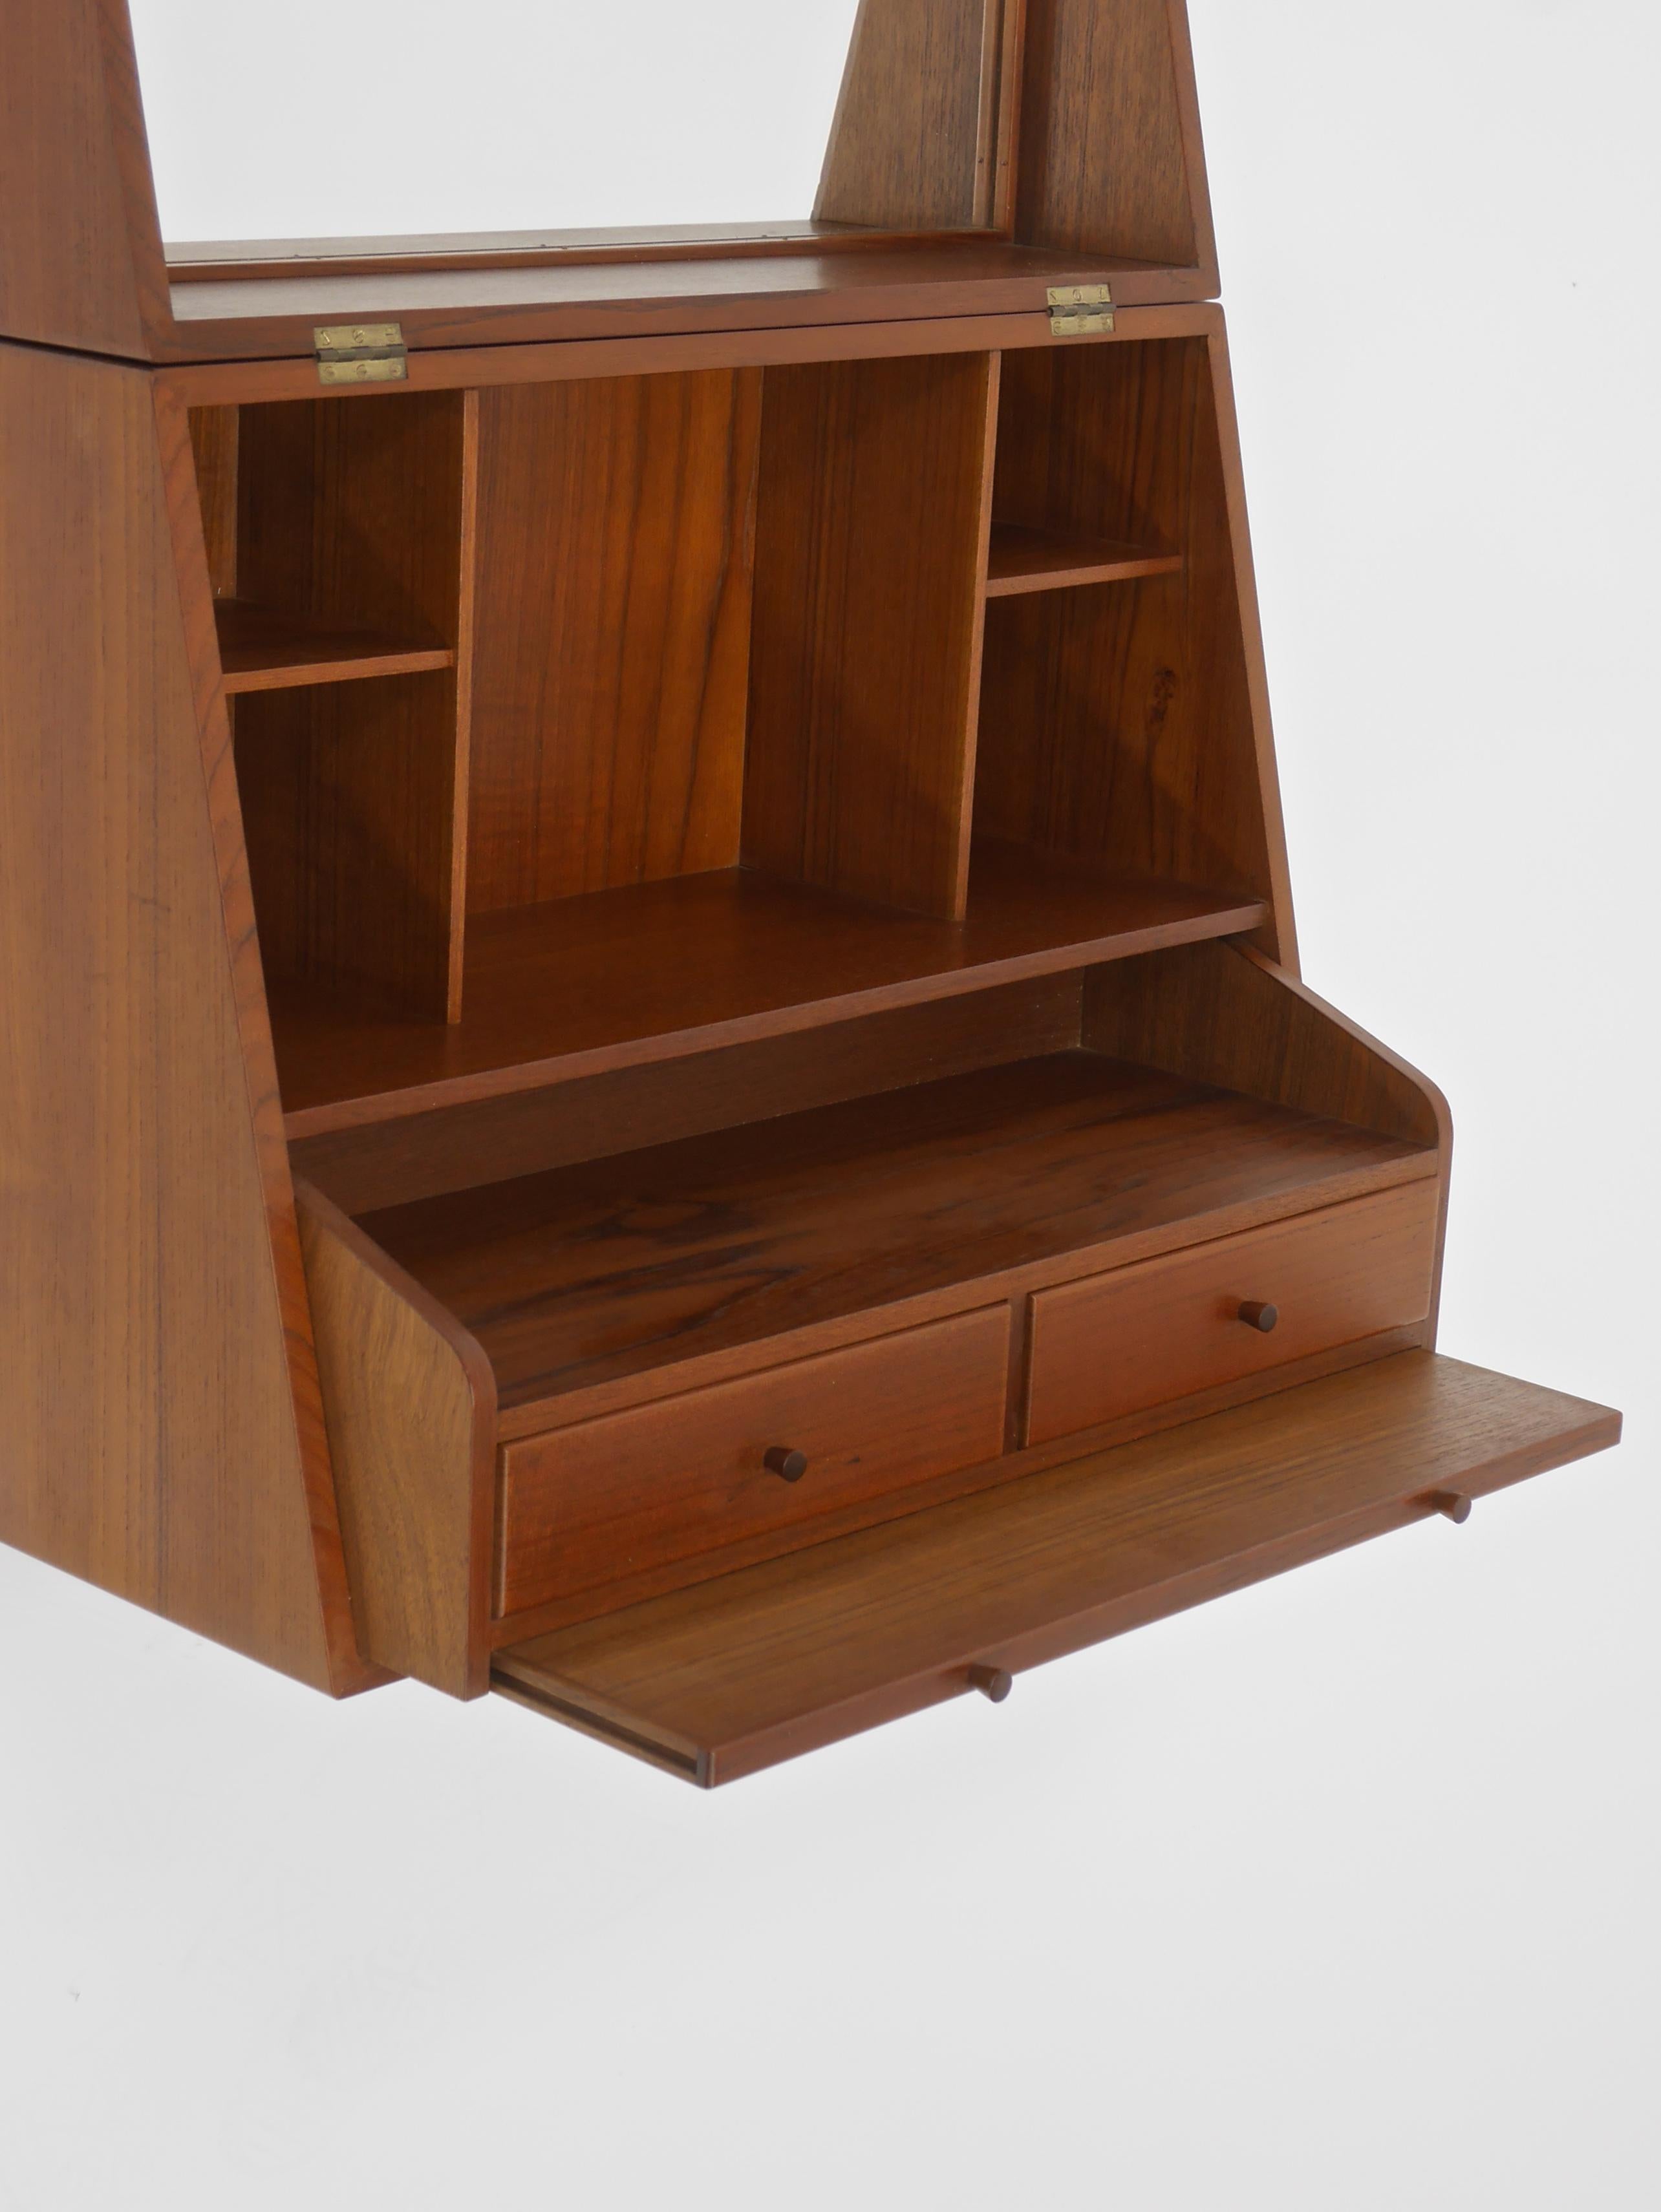 Folding Wall-Mounted Vanity in Teak by P. Jensen and Knud Frandsen In Good Condition For Sale In Hadley, MA